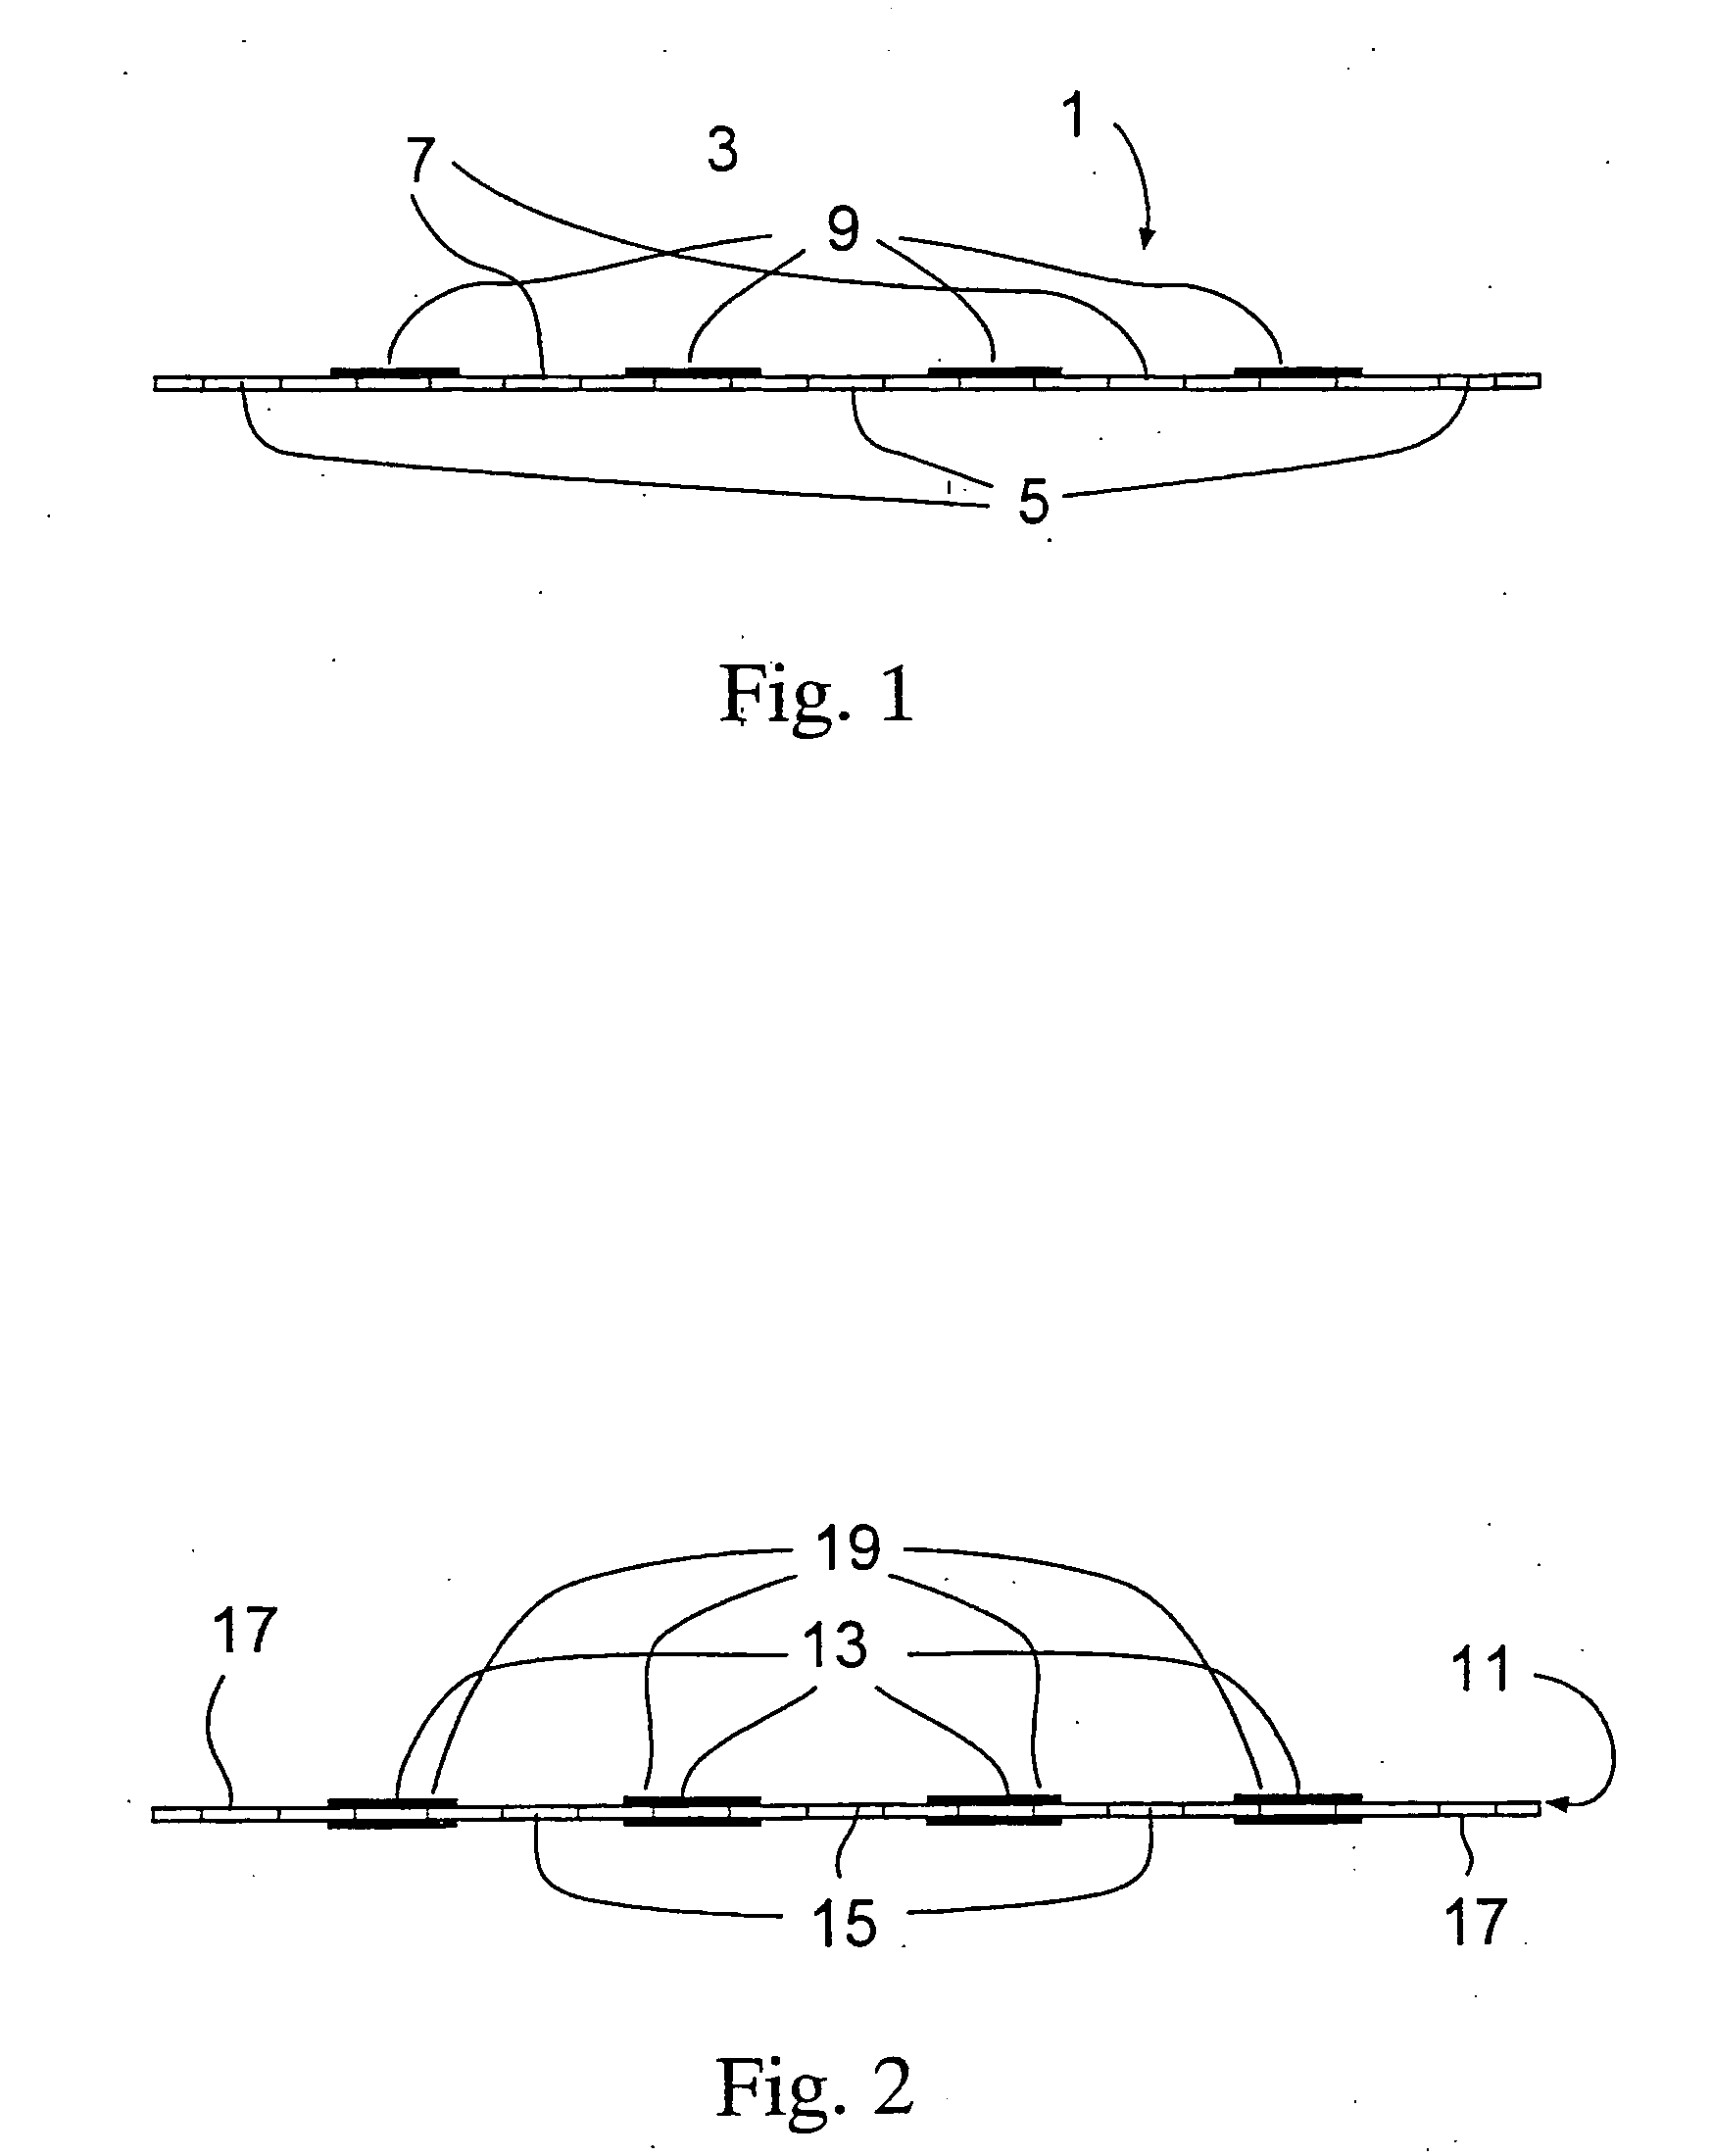 Sealing device for filtration devices